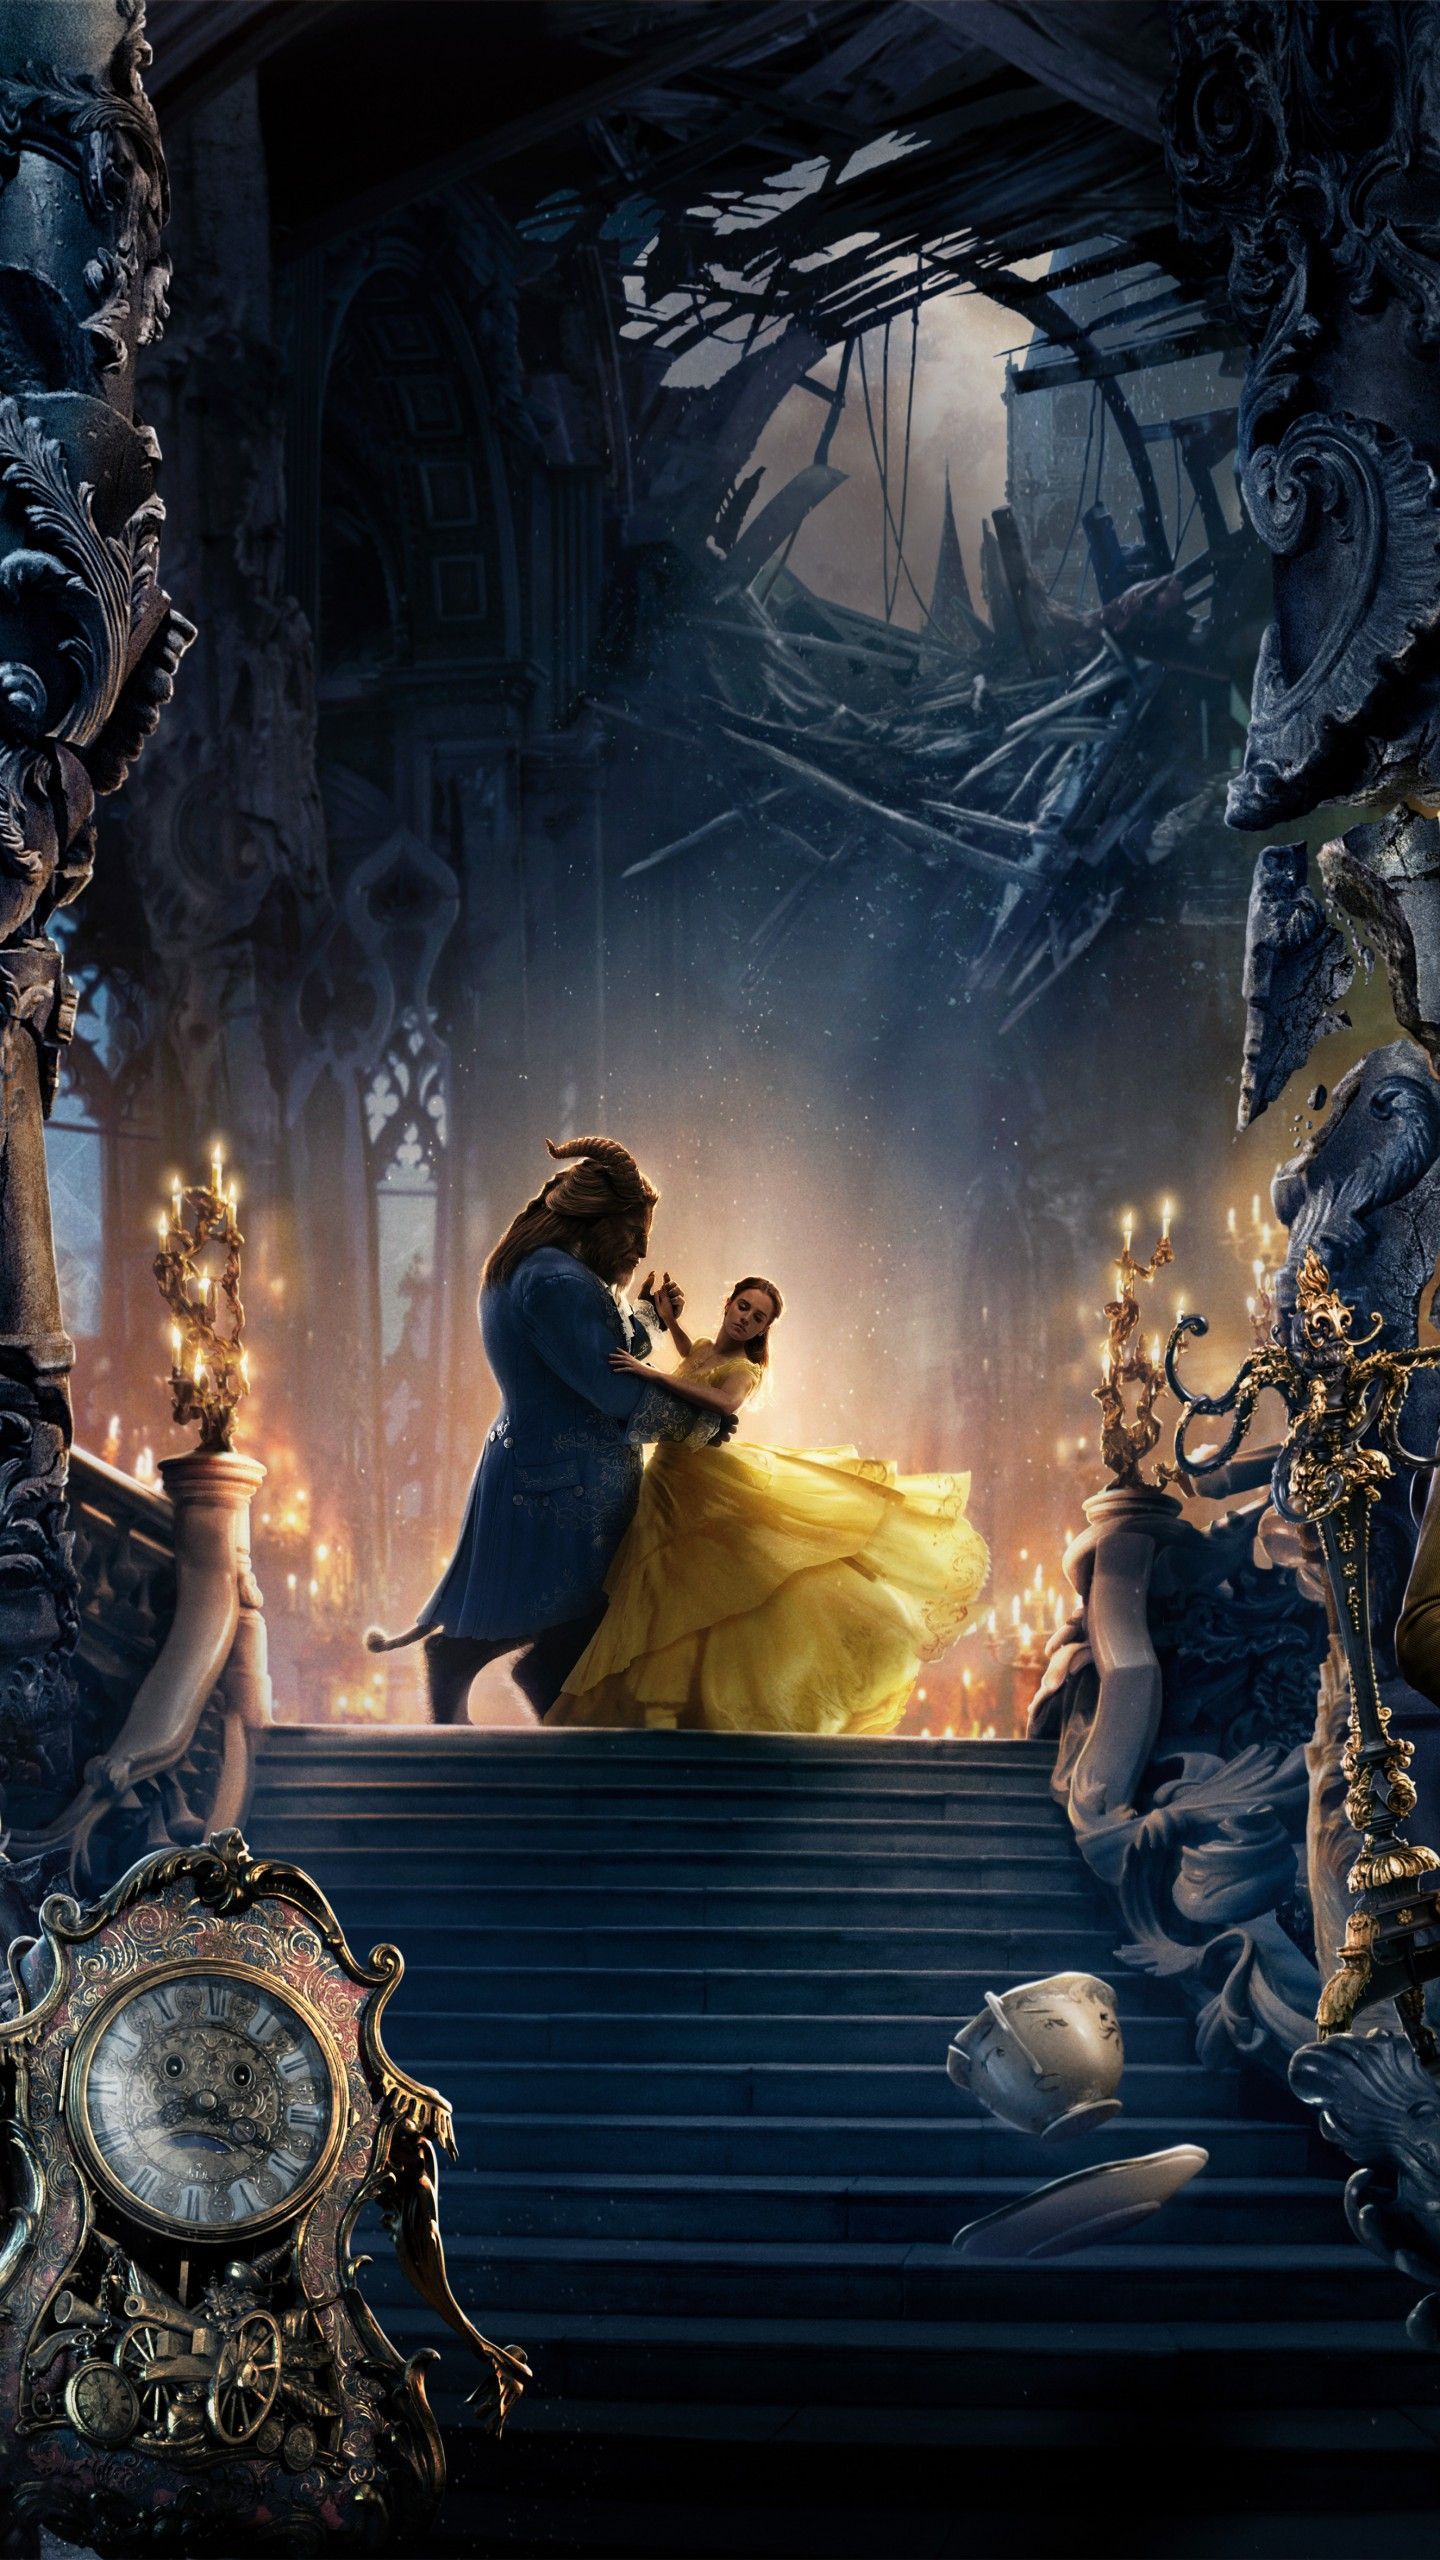 Perhaps The Best 1 Beauty And The Beast Wallpaper For Desktop Homeicon Info